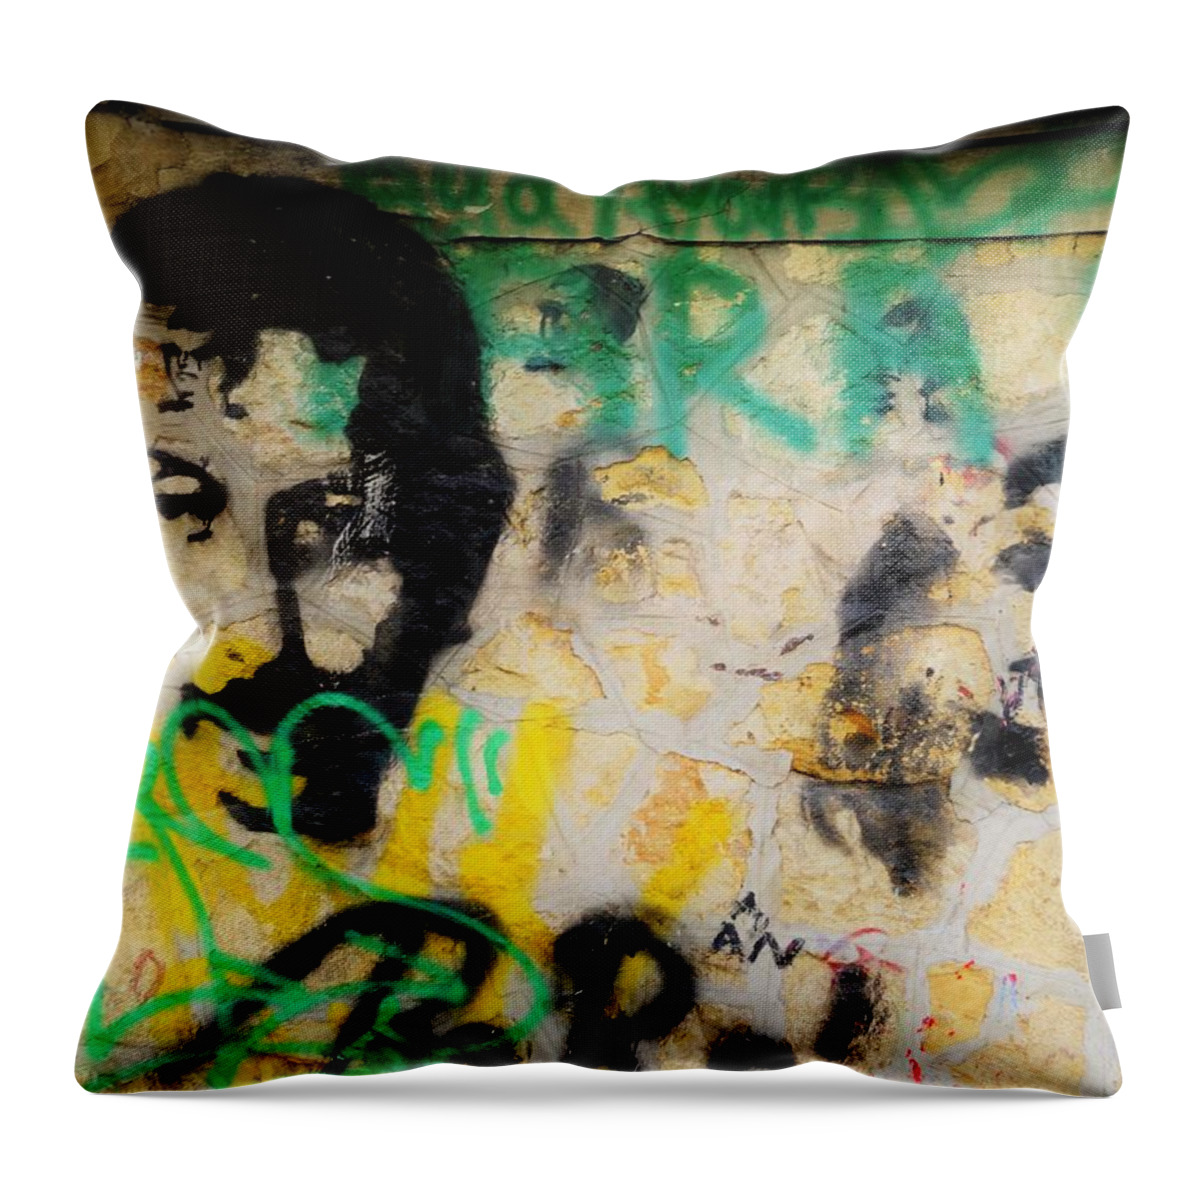 Beirut Throw Pillow featuring the photograph Beirut Wall Love by Funkpix Photo Hunter